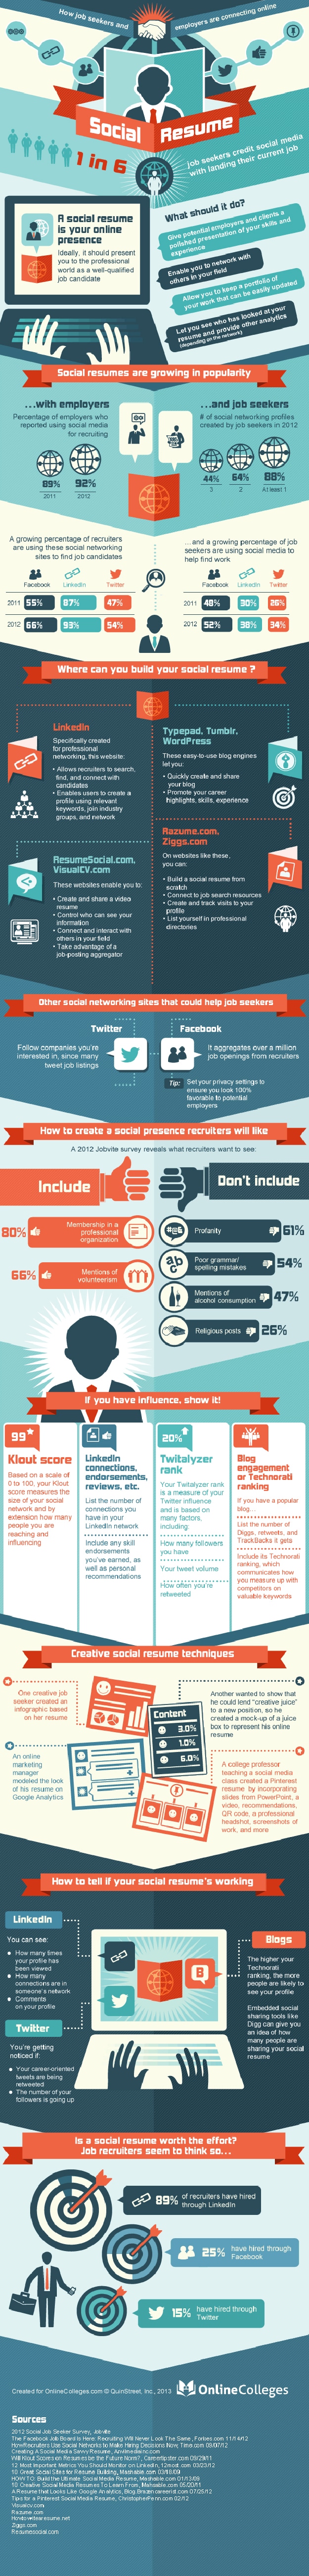 How To Be Sure You Have A Strong Social Resume [Infographic]